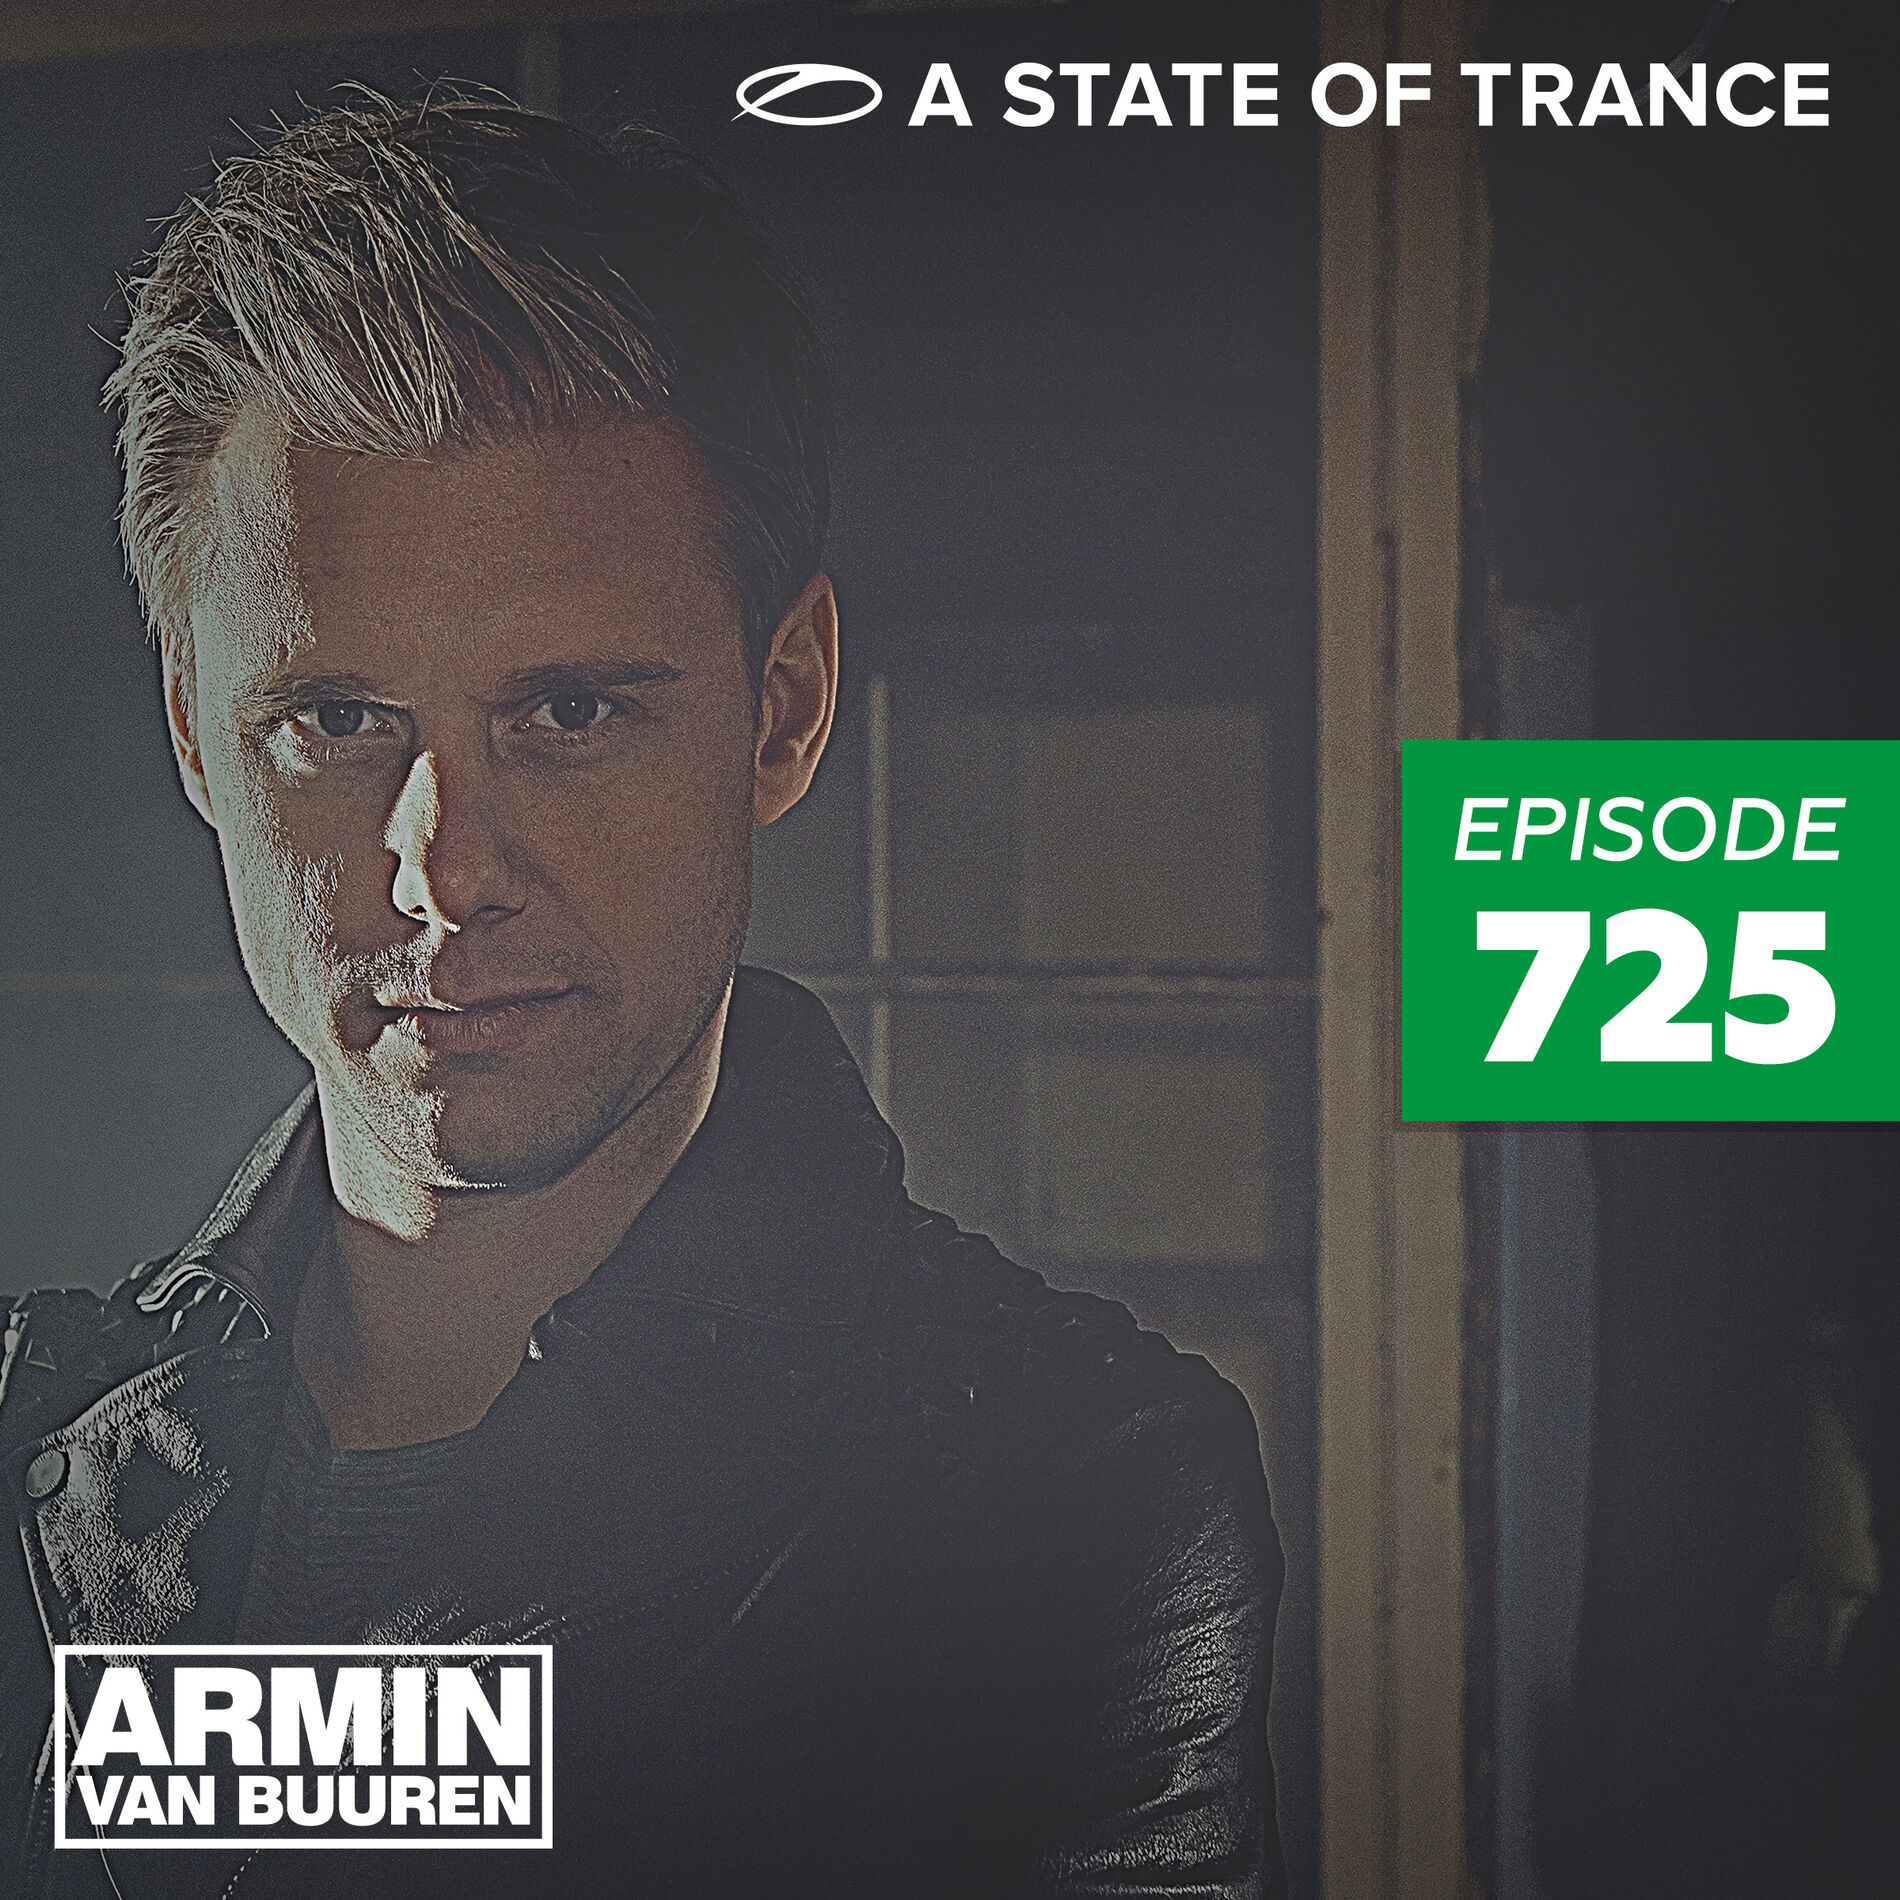 Armin van Buuren - A State Of Trance Episode 725 (Live from A State of  Trance @ Ushuaïa